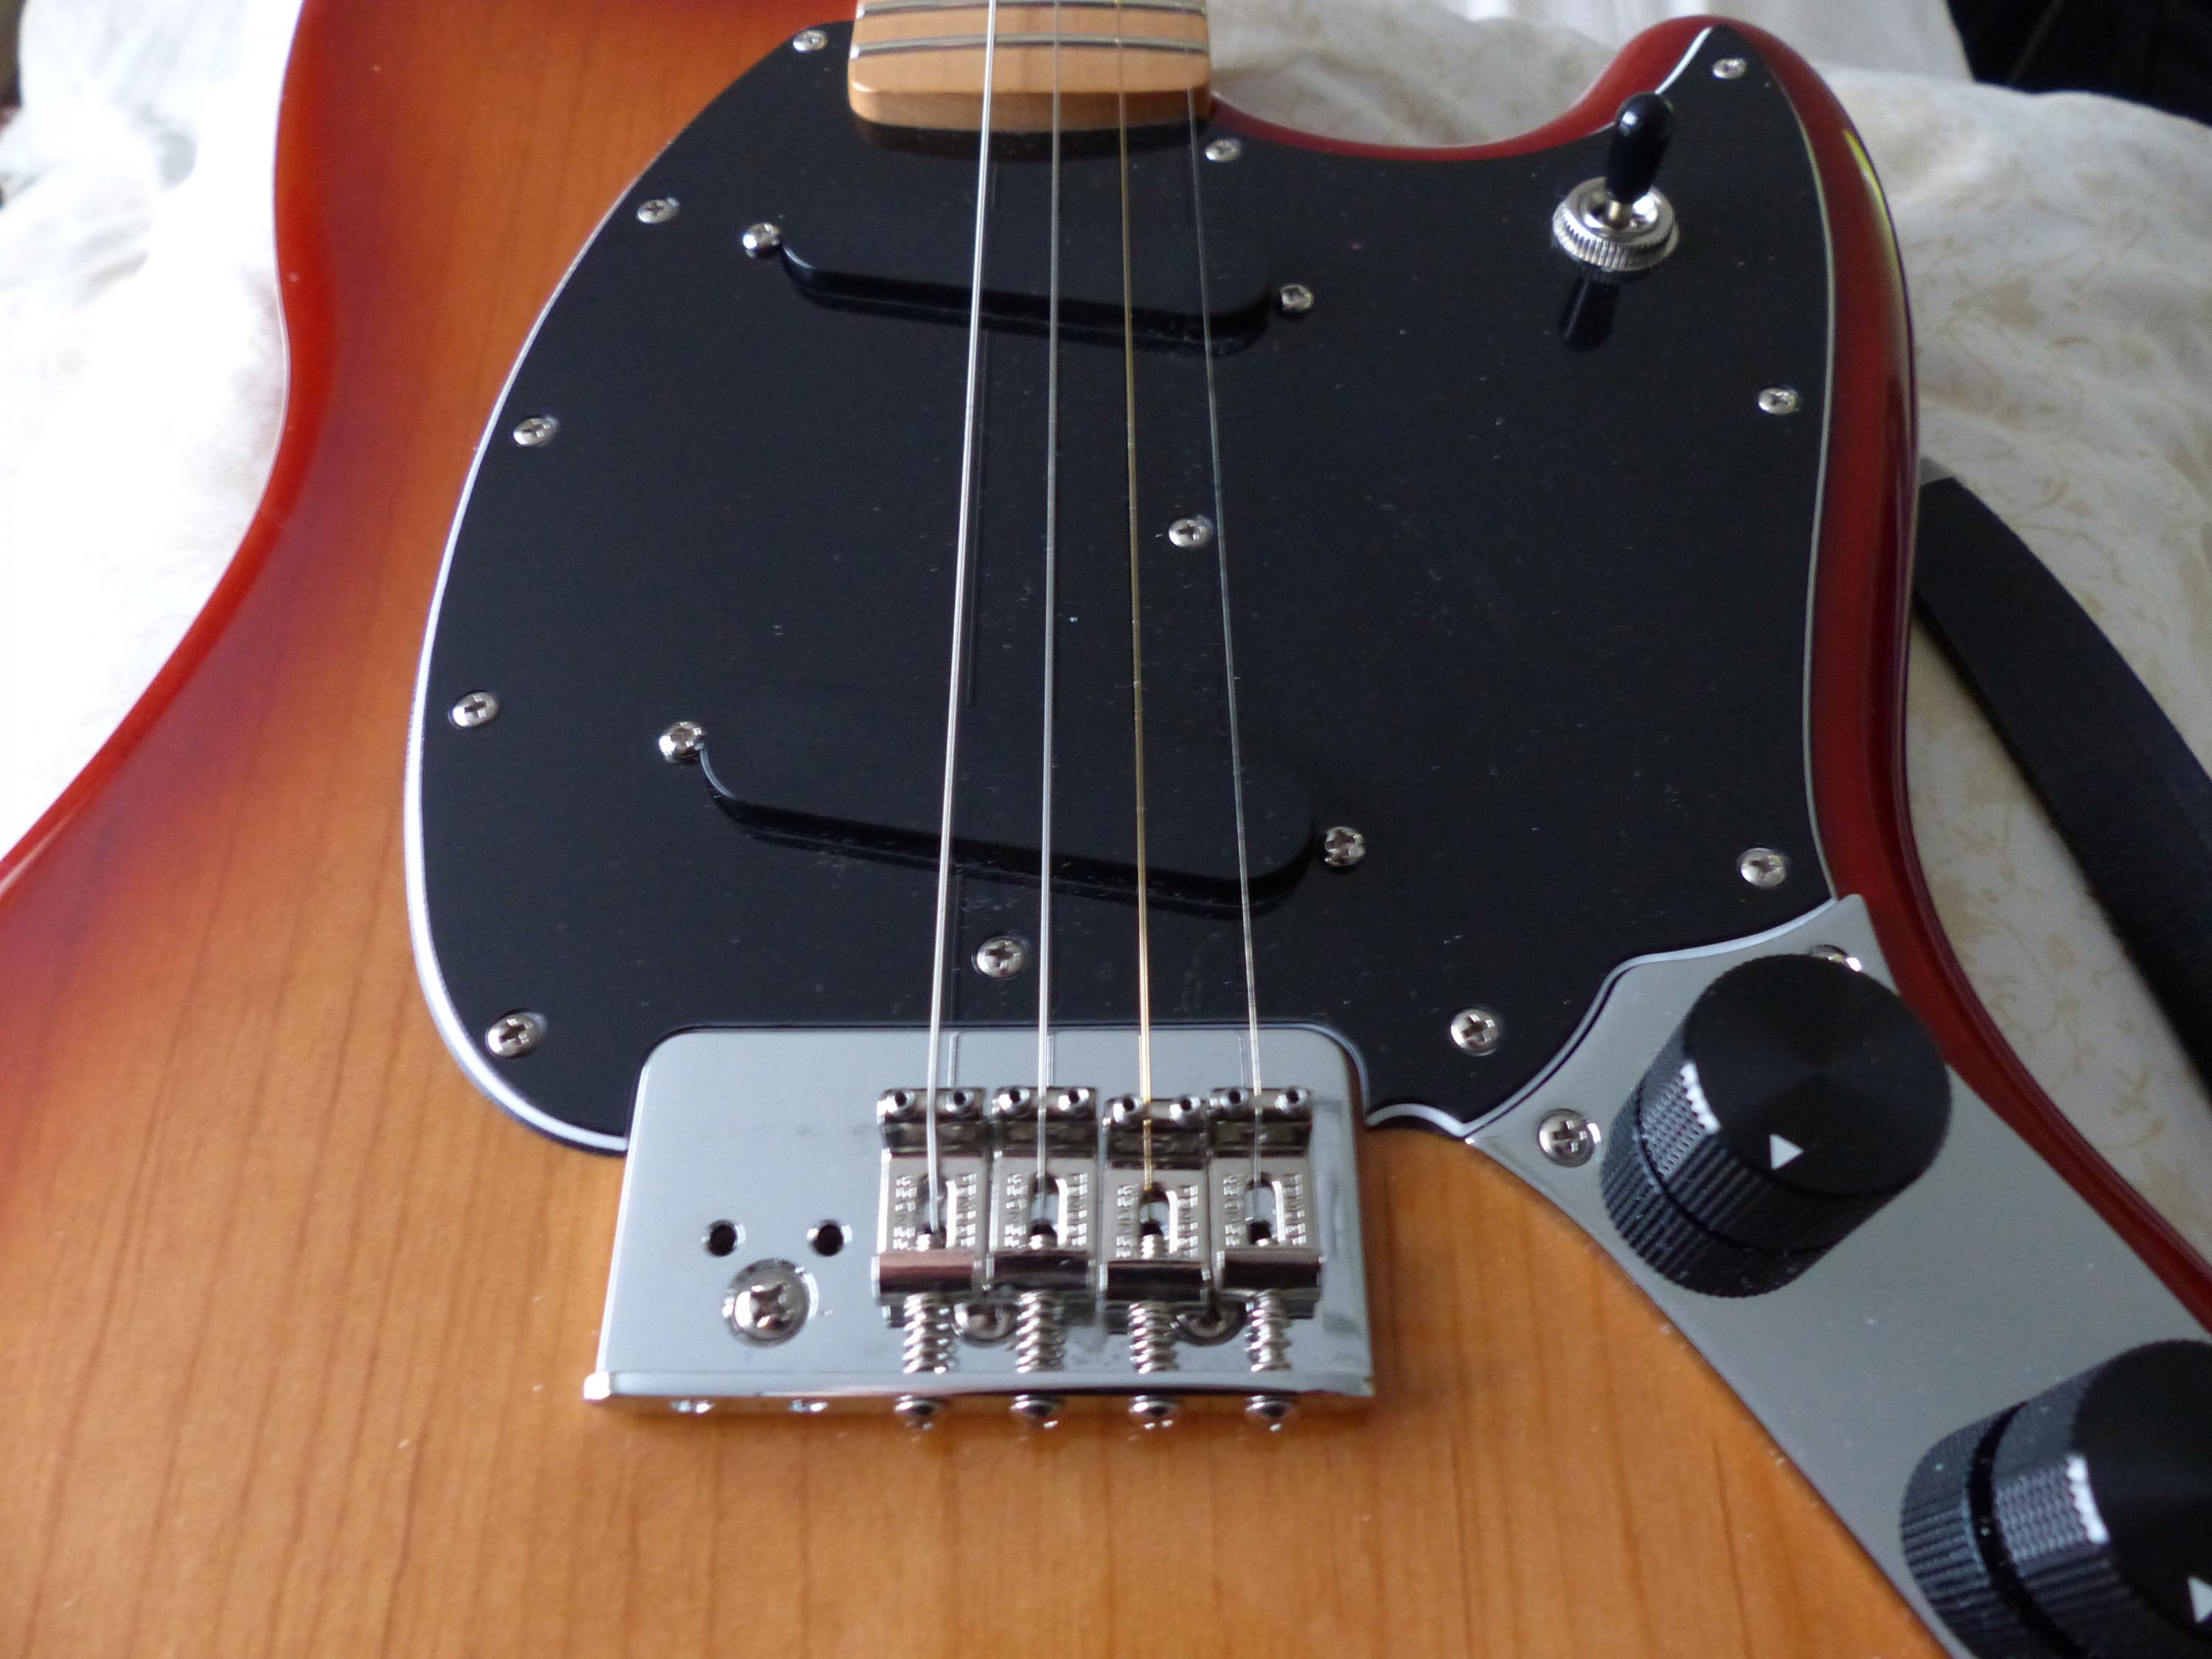 To Fit Whammy Bar To Fender Squire 'Mustang'-p1040924-jpg